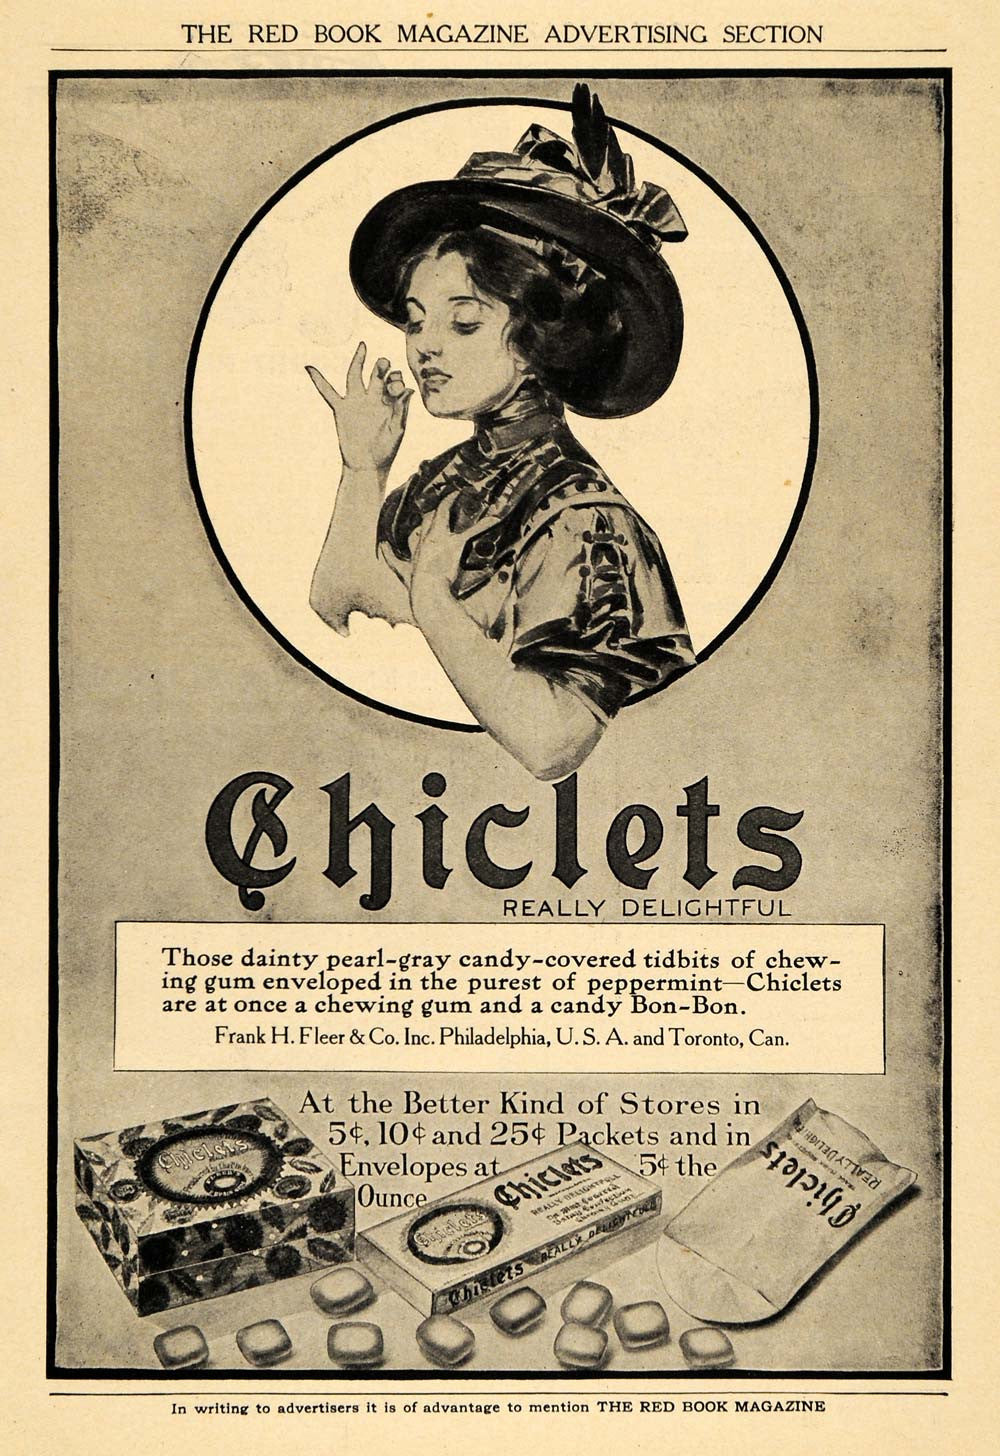 1908 Ad Chiclets Fashionable Girl Hat Chewing Gum Kraft - ORIGINAL RB1 - Period Paper
